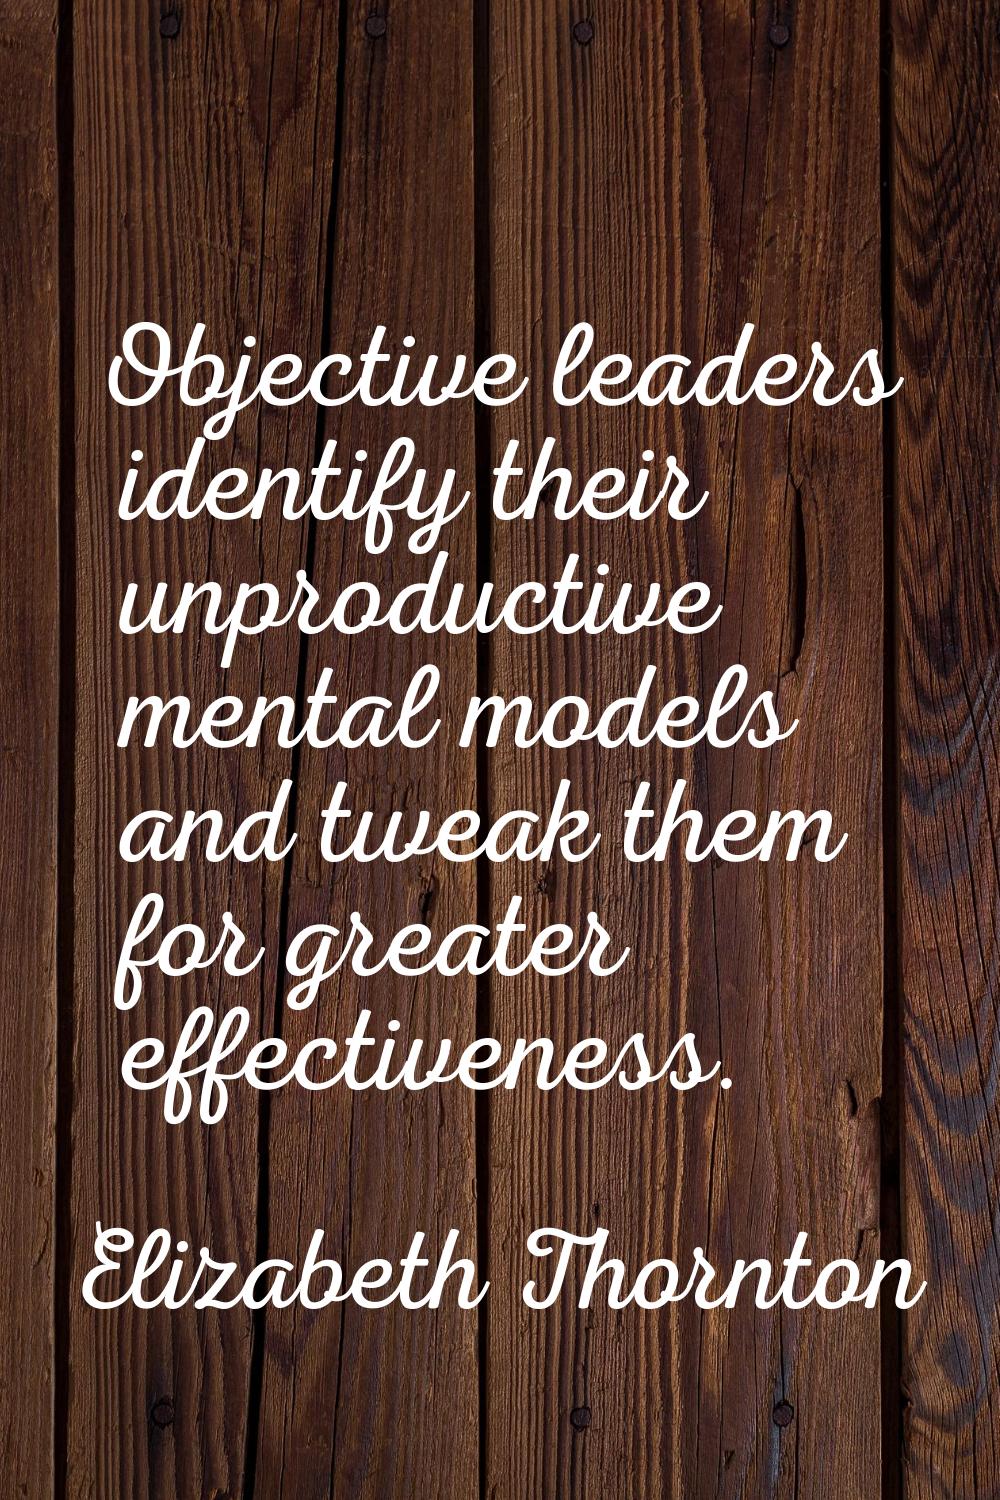 Objective leaders identify their unproductive mental models and tweak them for greater effectivenes